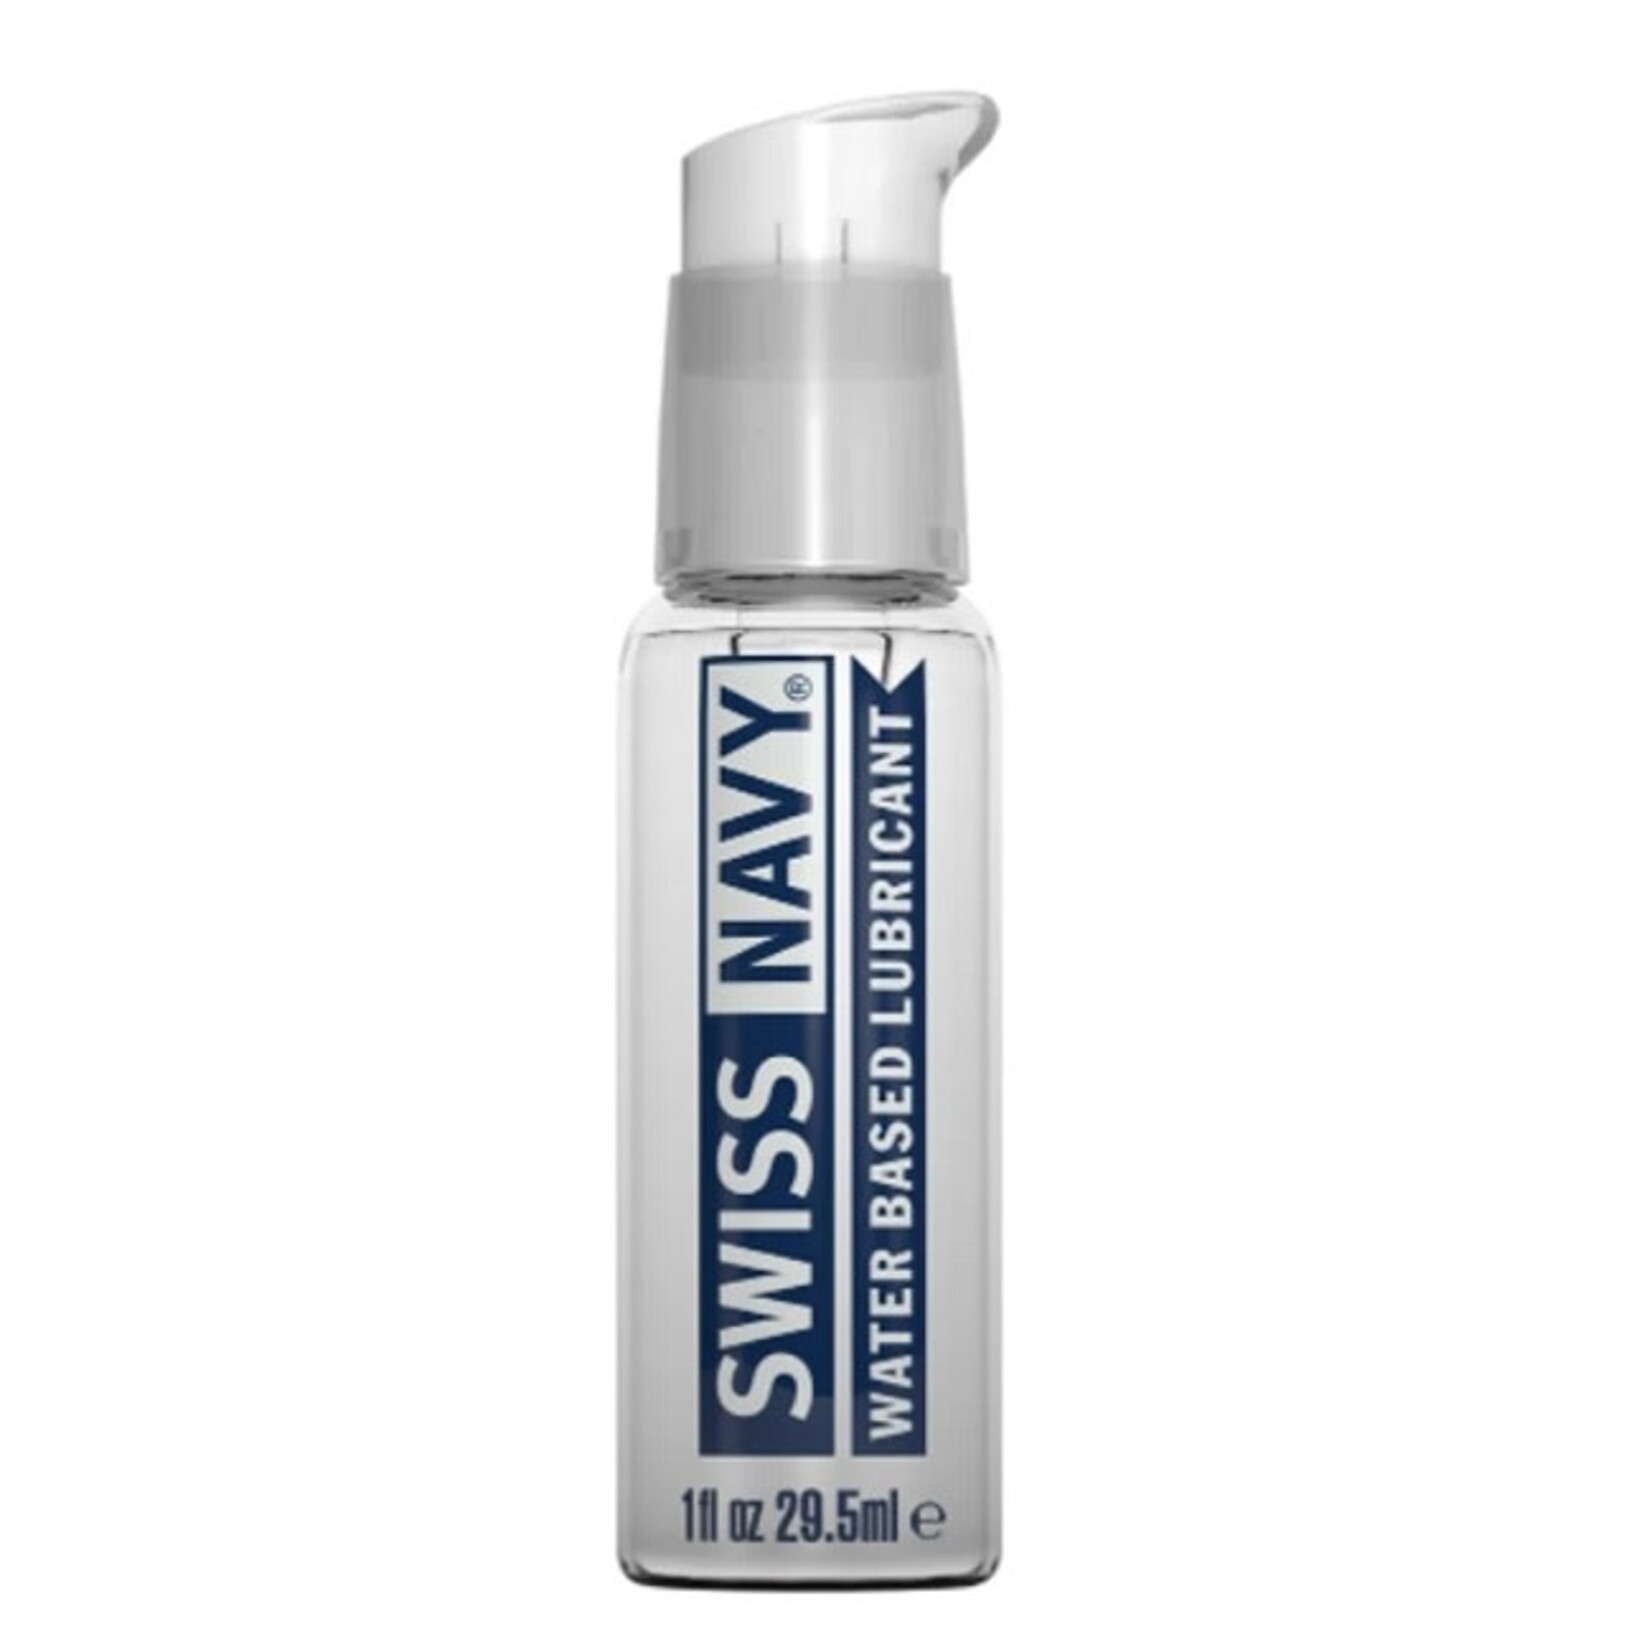 M.D. Science Lab Swiss Navy Water-Based Lubricant 1oz